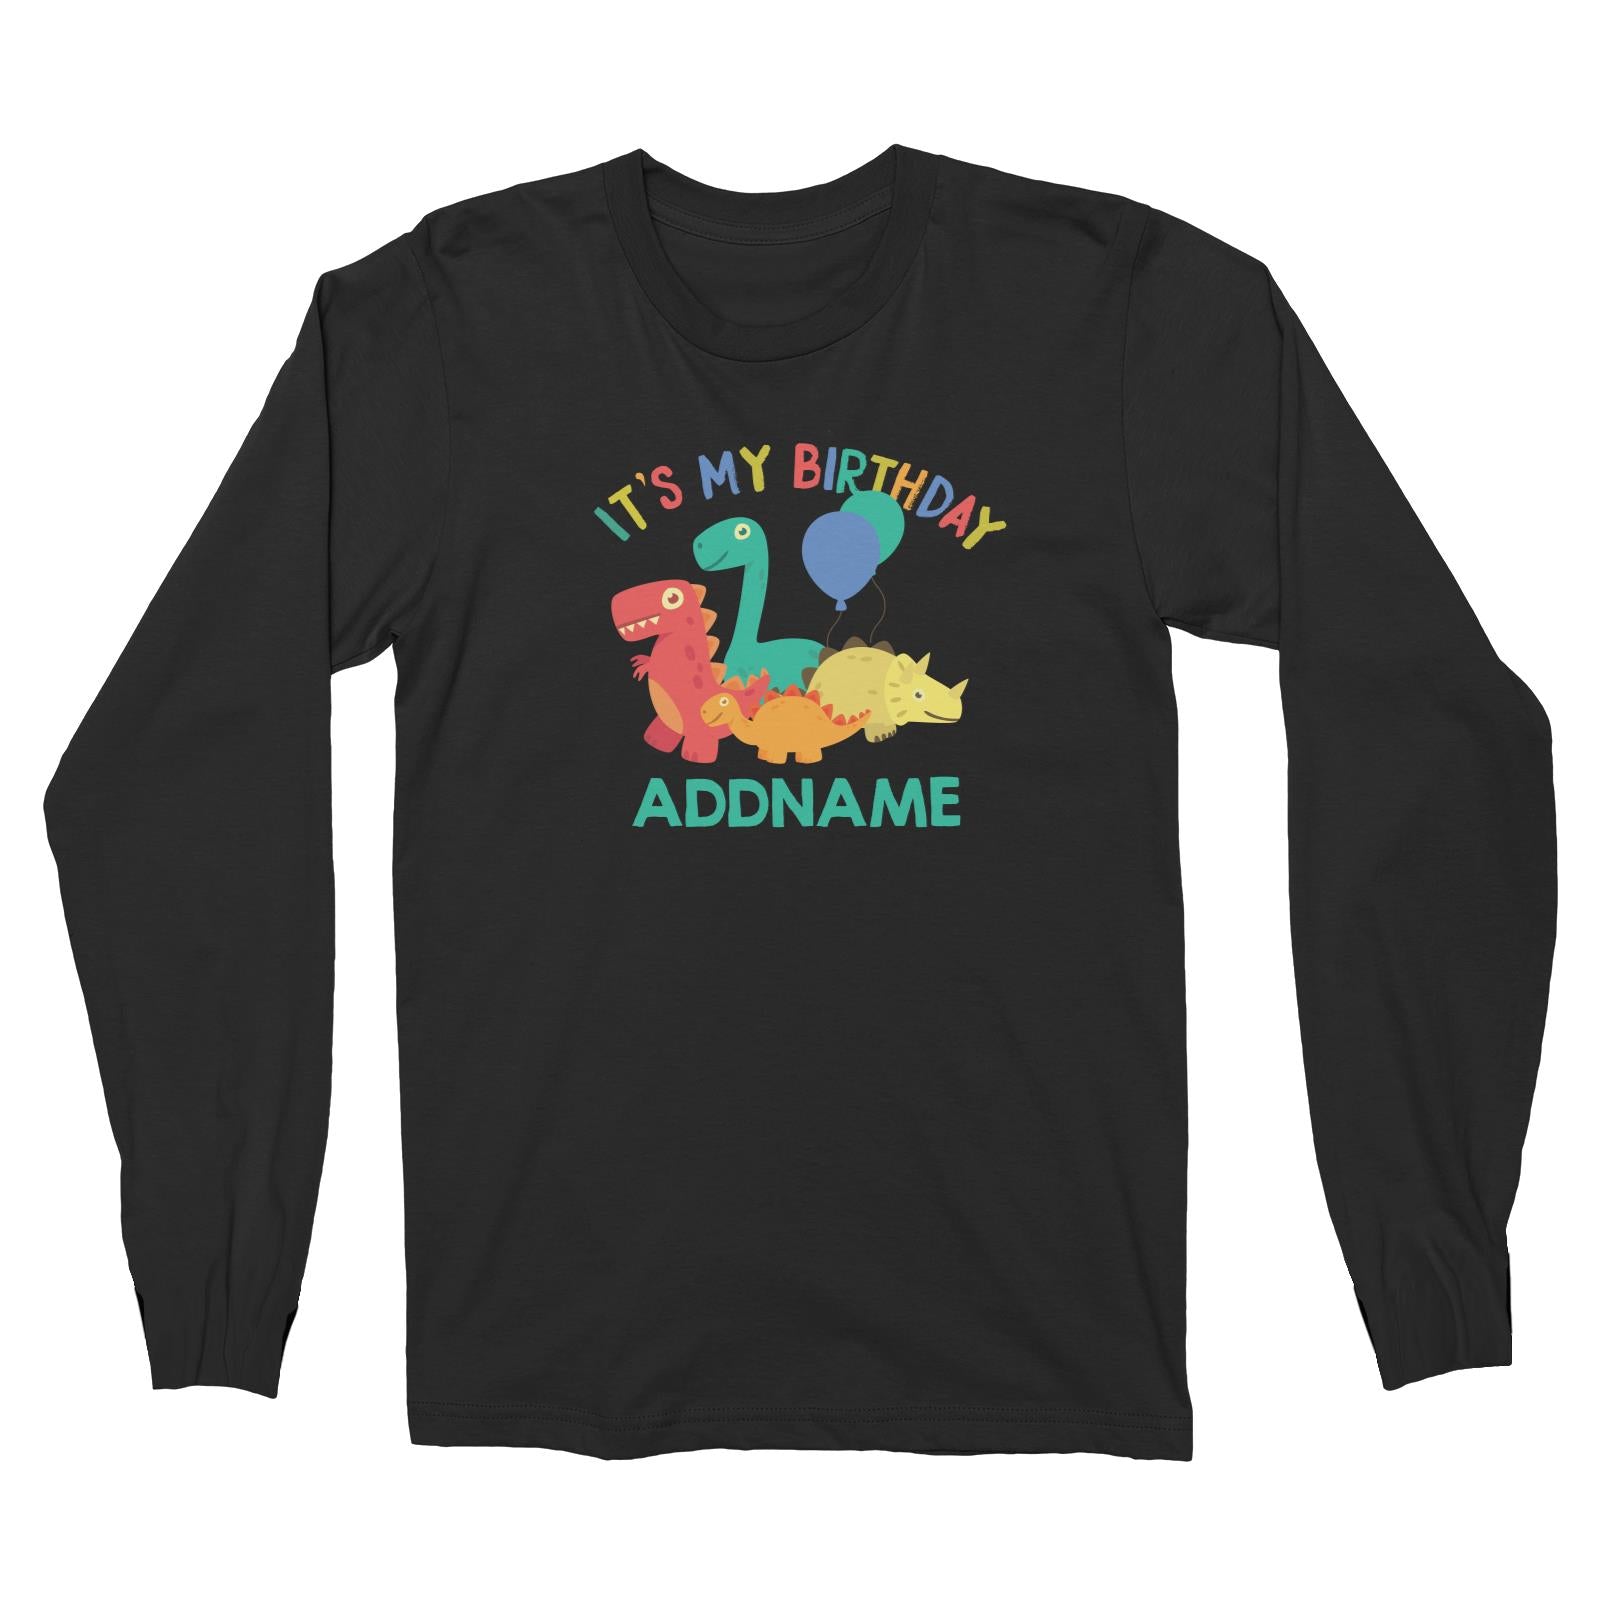 It's My Birthday Addname with Cute Dinosaurs and Balloons Birthday Theme Long Sleeve Unisex T-Shirt